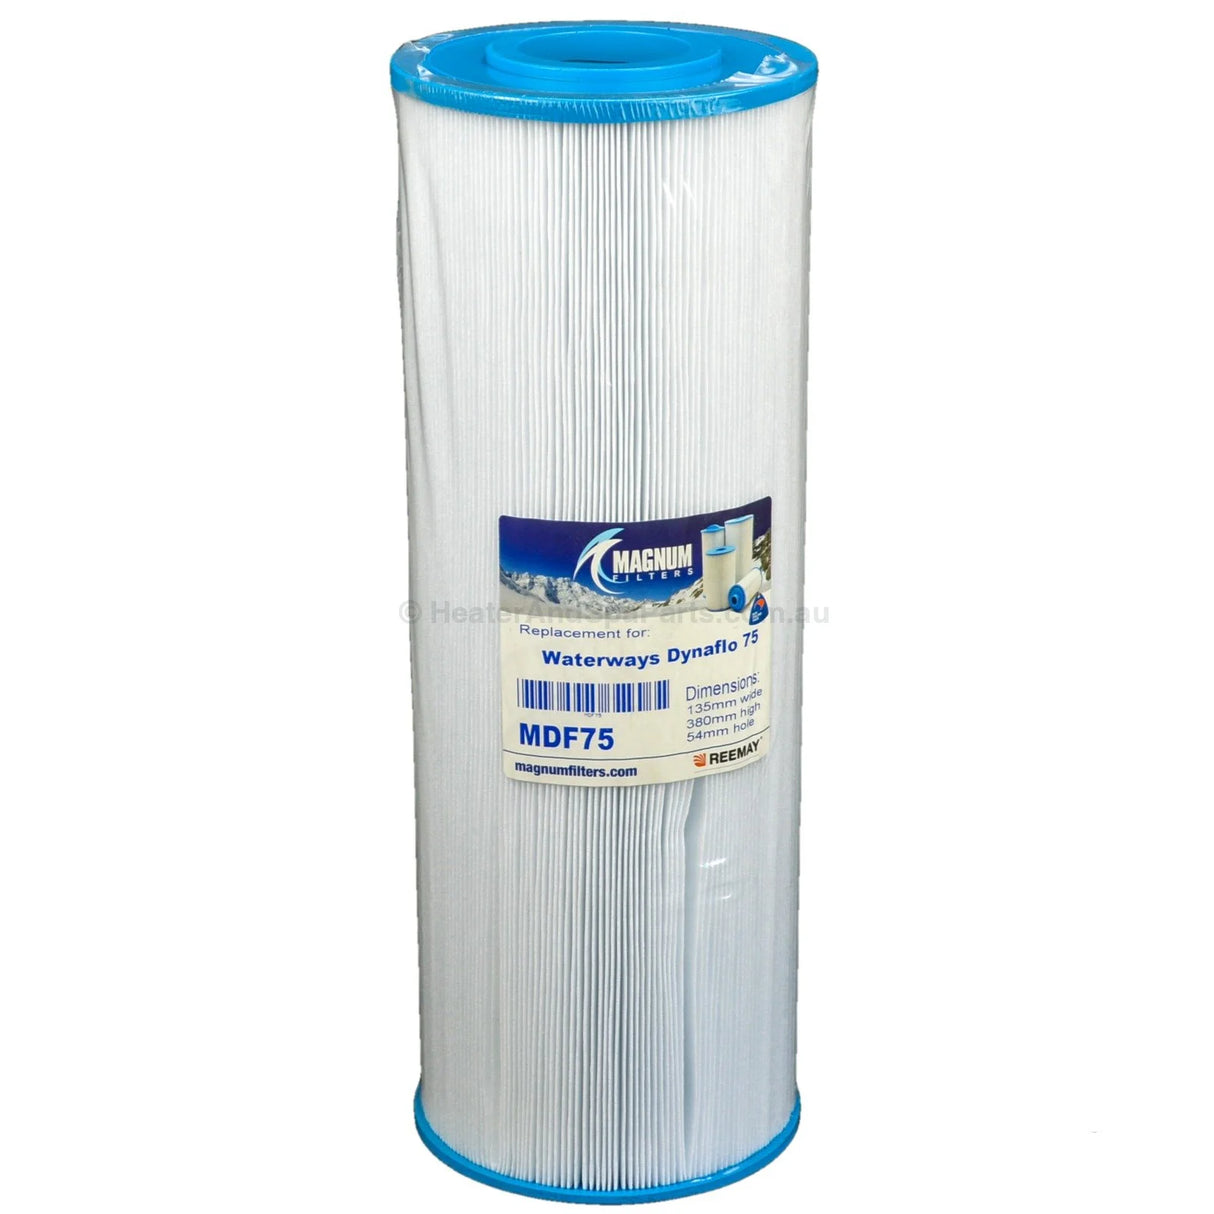 380mm x 135mm CMP 75 / Maax / Waterways Dynaflo 75 Cartridge Filter - Heater and Spa Parts